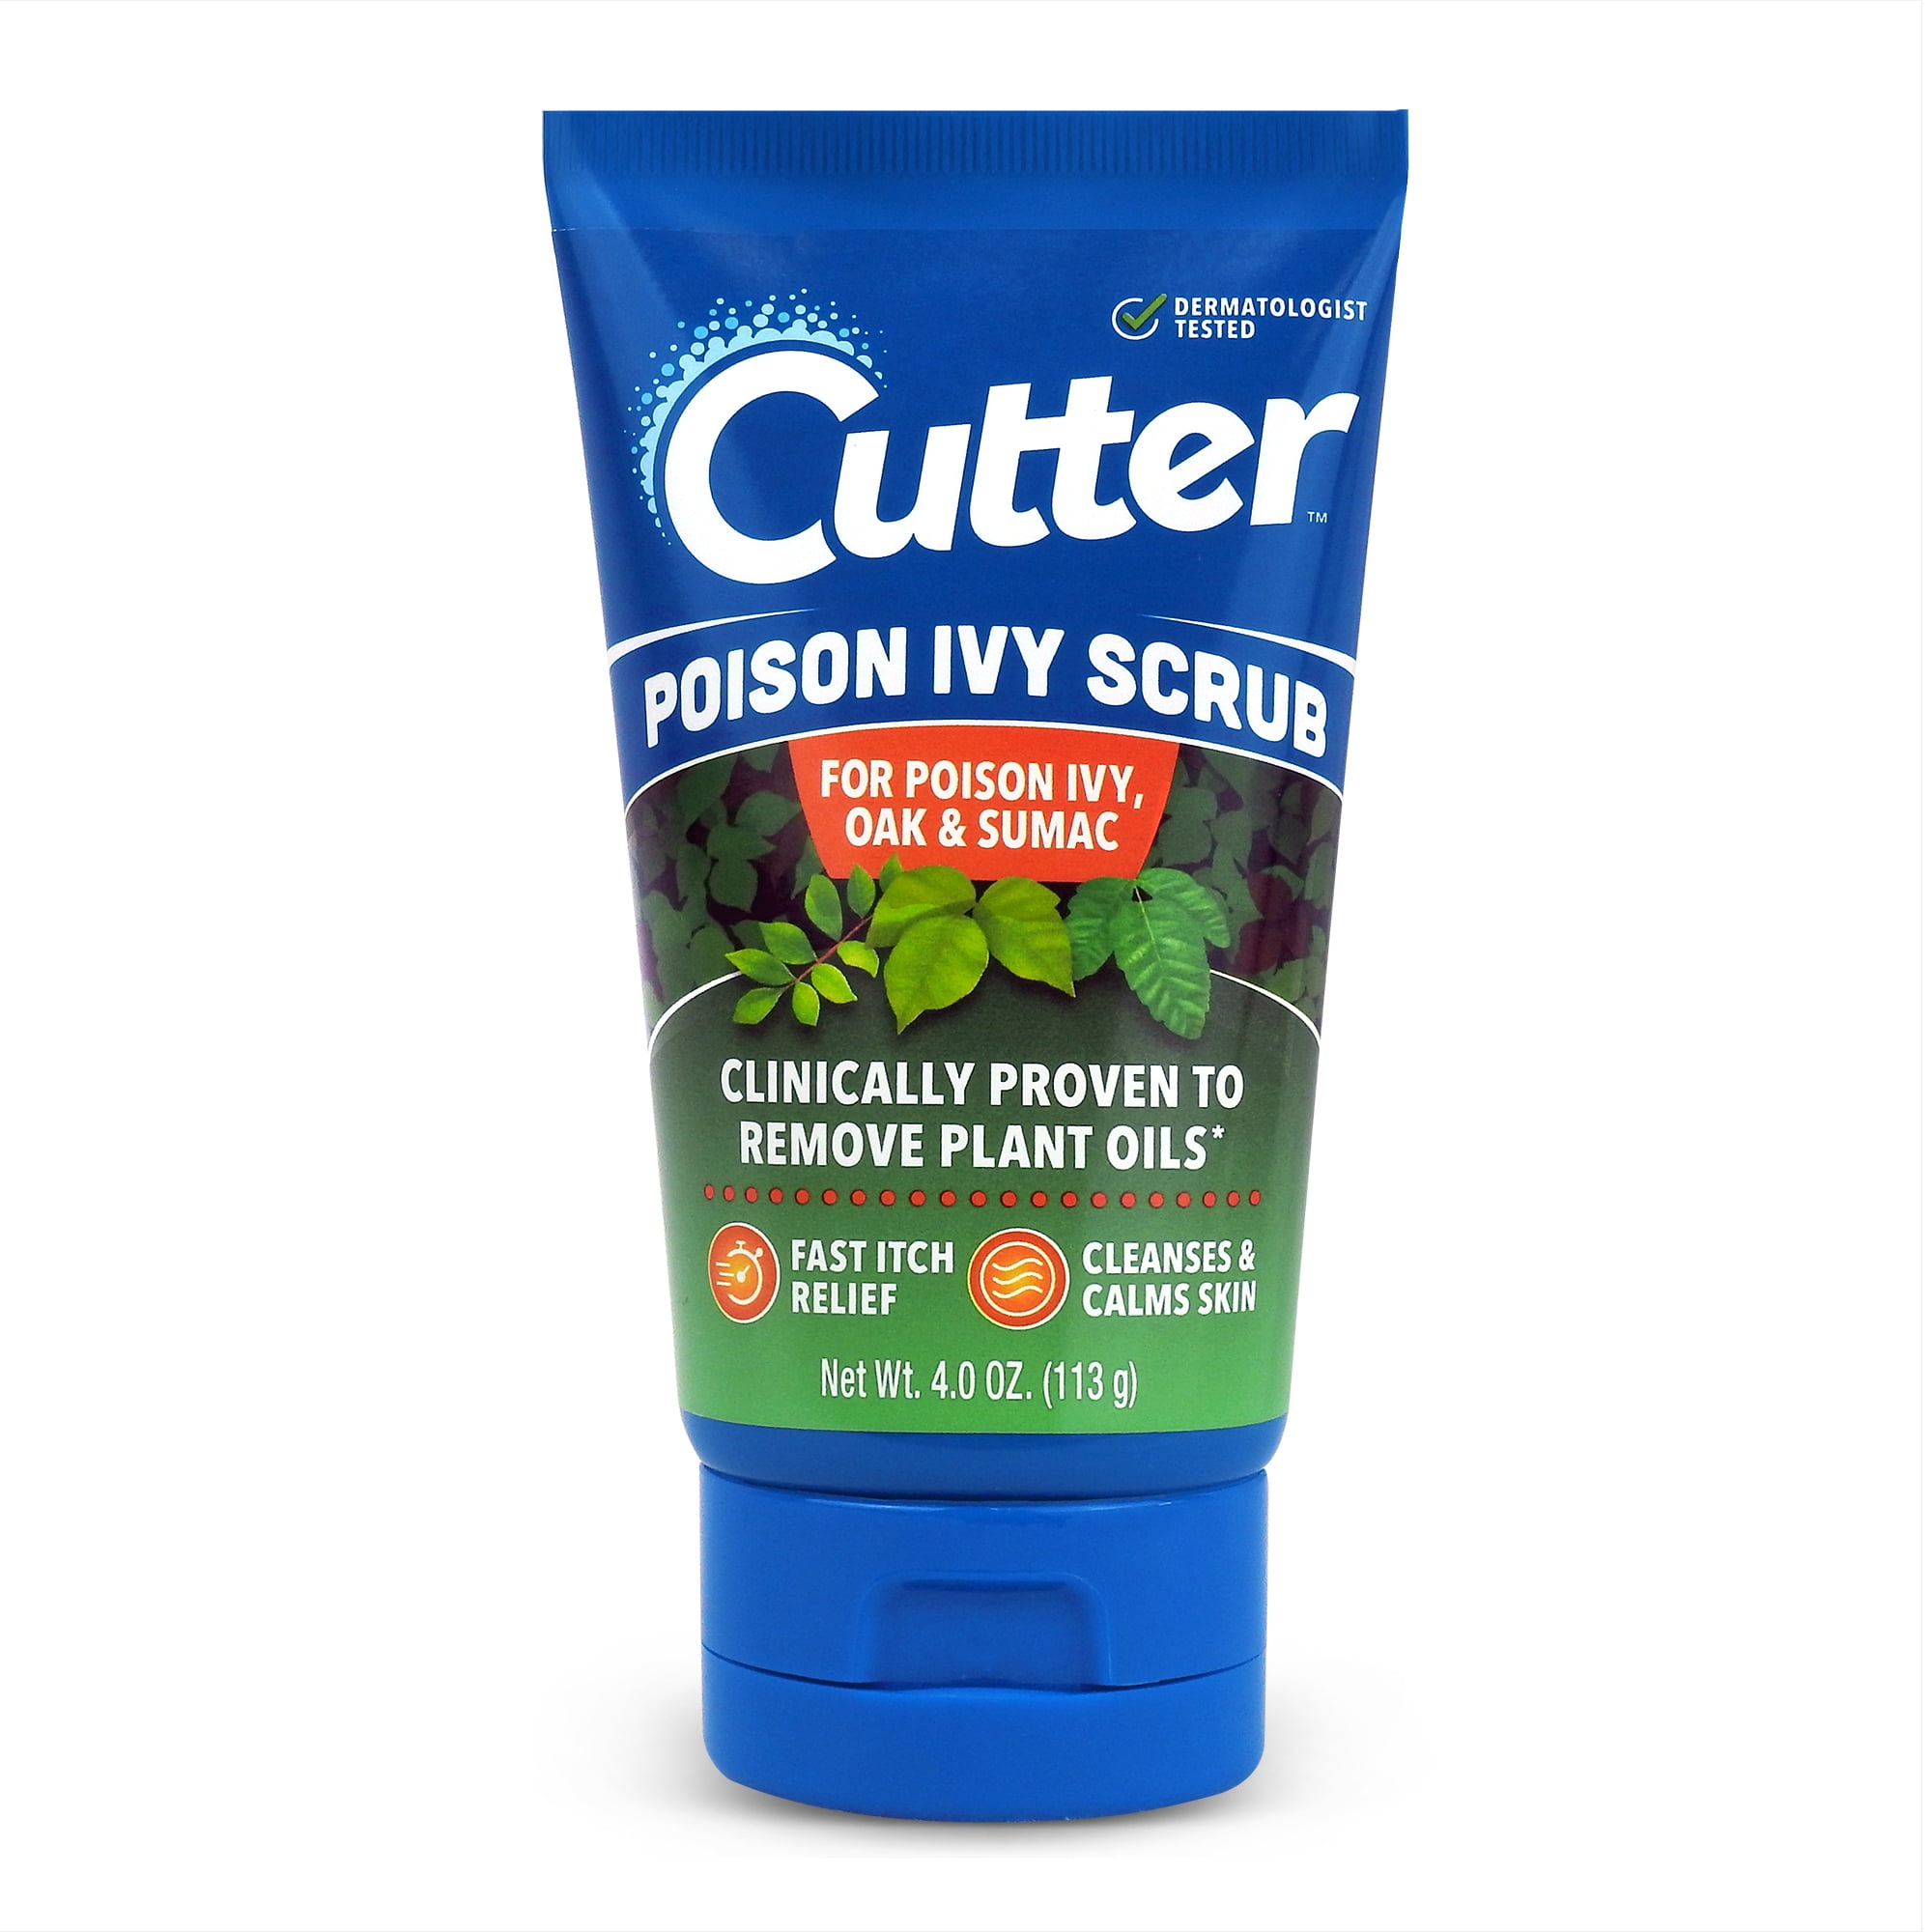 Cutter First Aid Poison Ivy Scrub for Itch Relief, 4oz